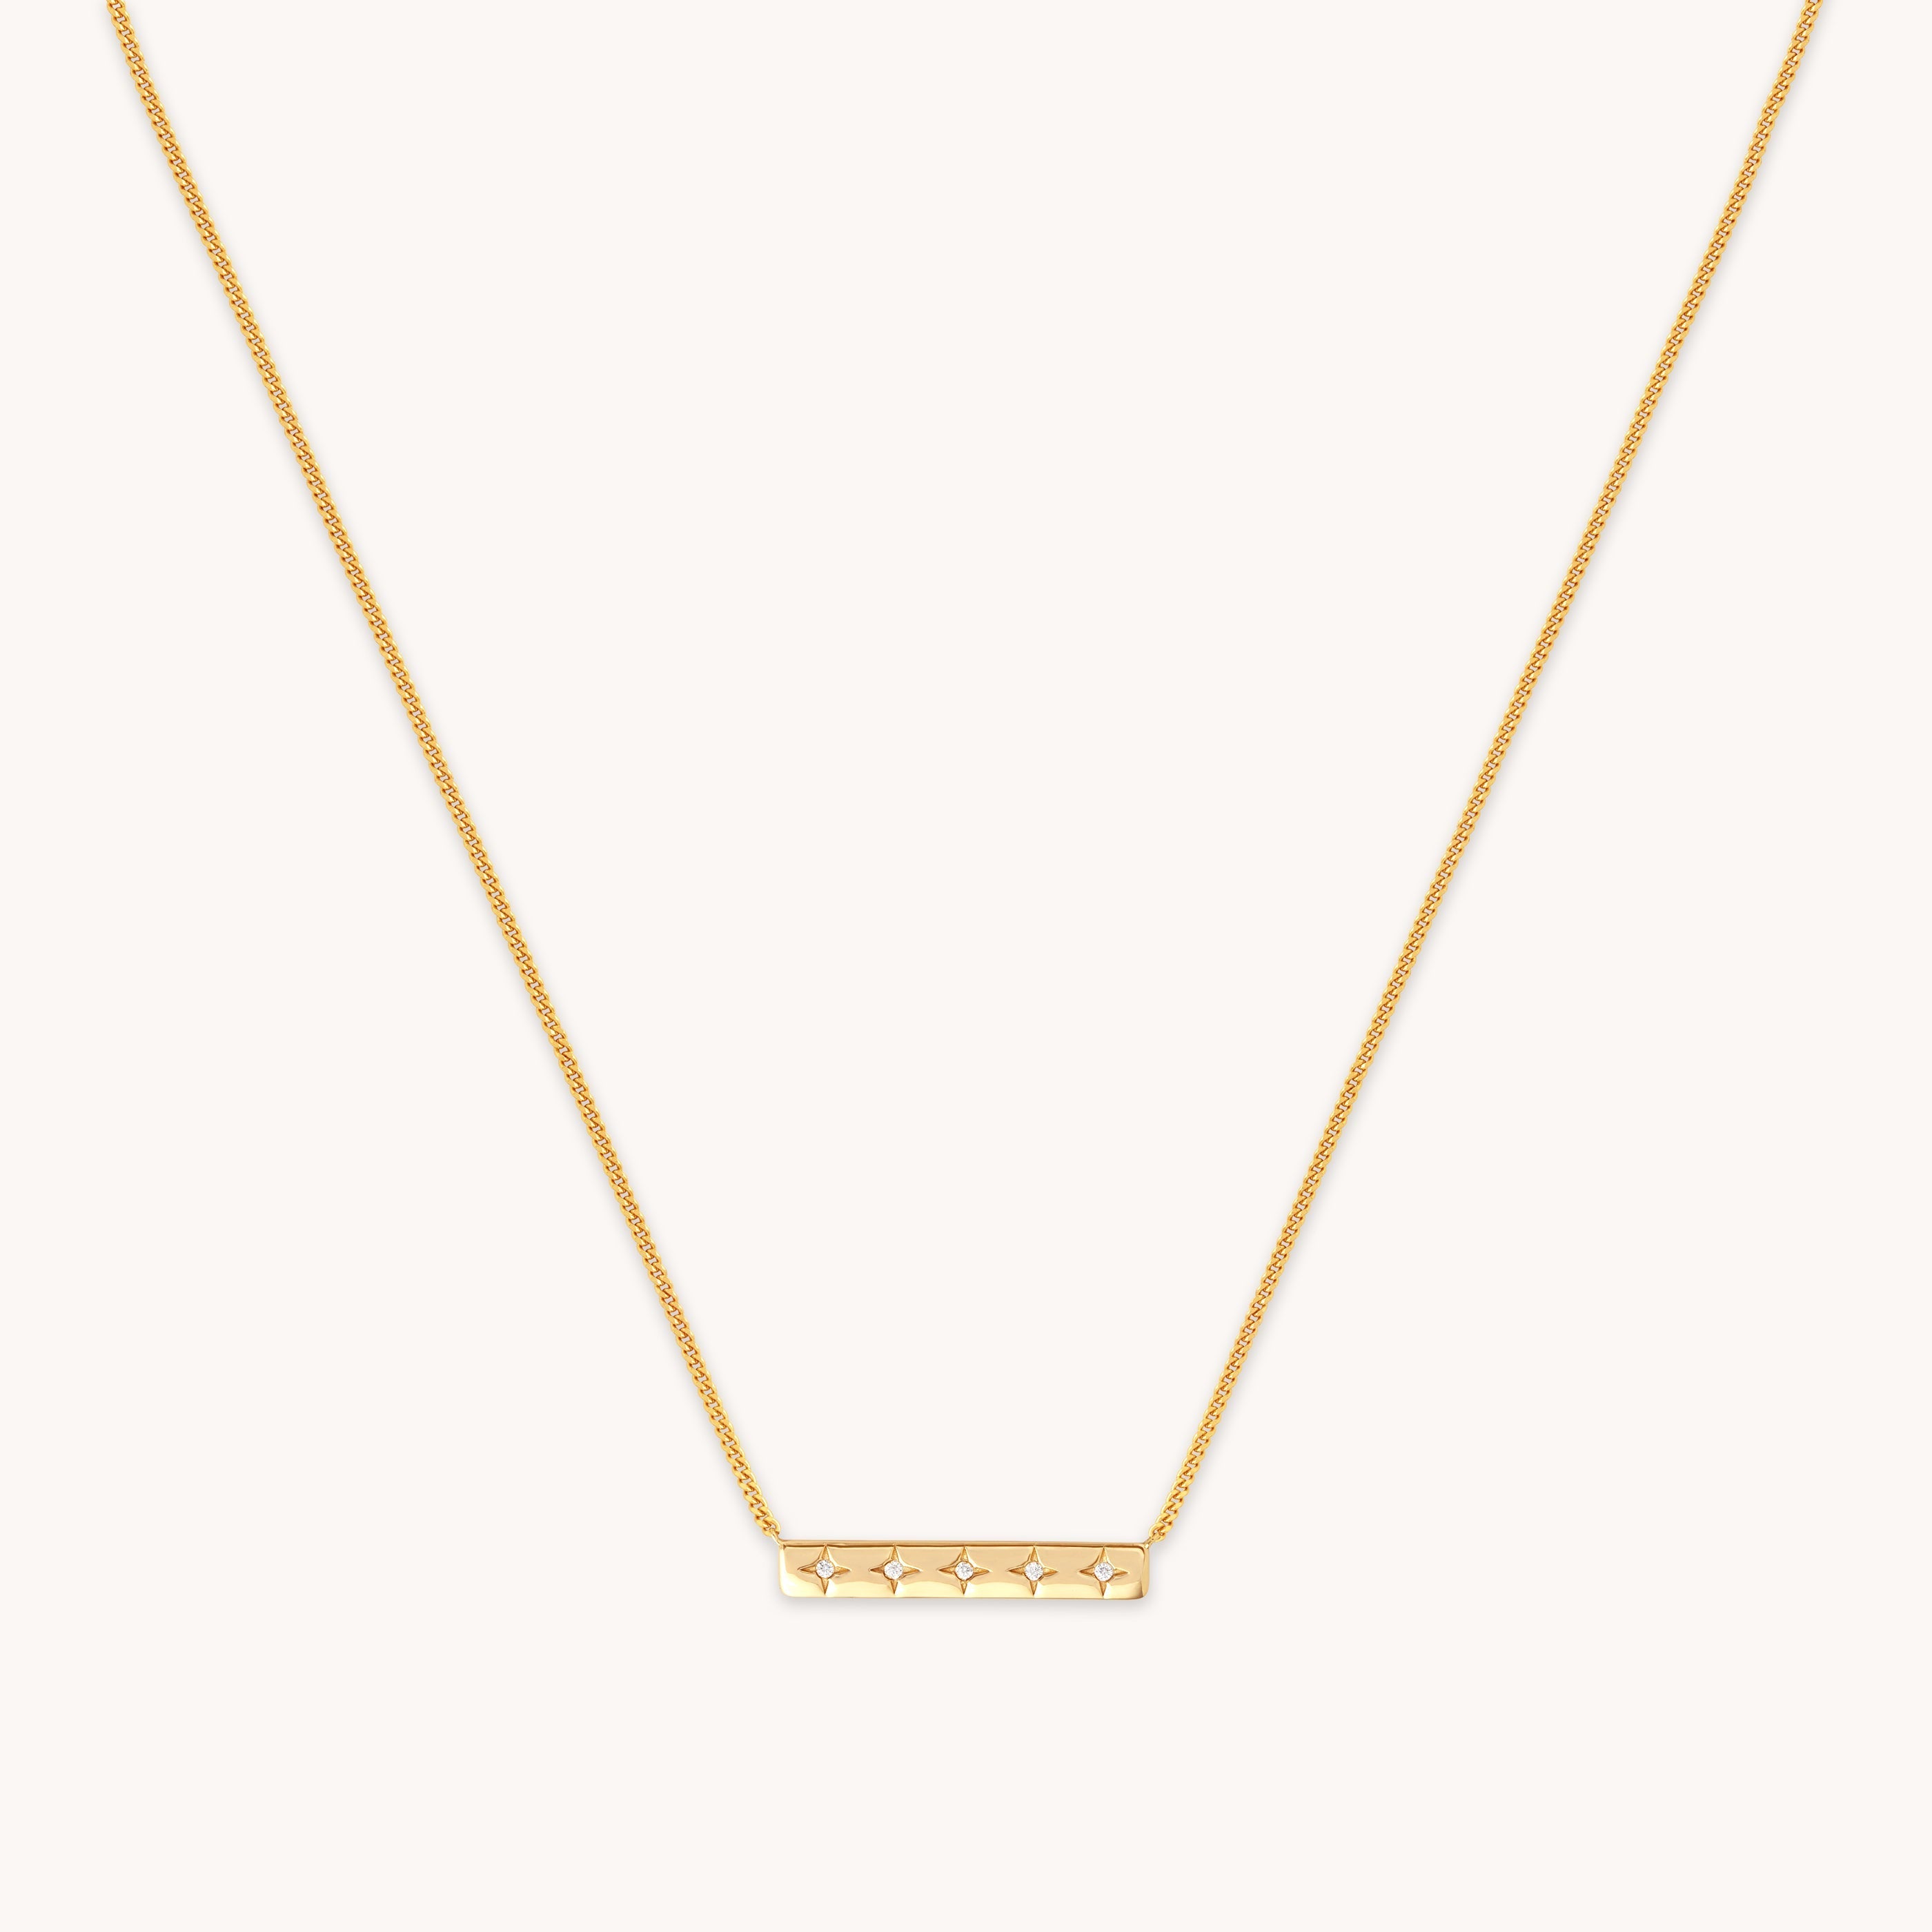 Cosmic Star Bar Necklace in Gold